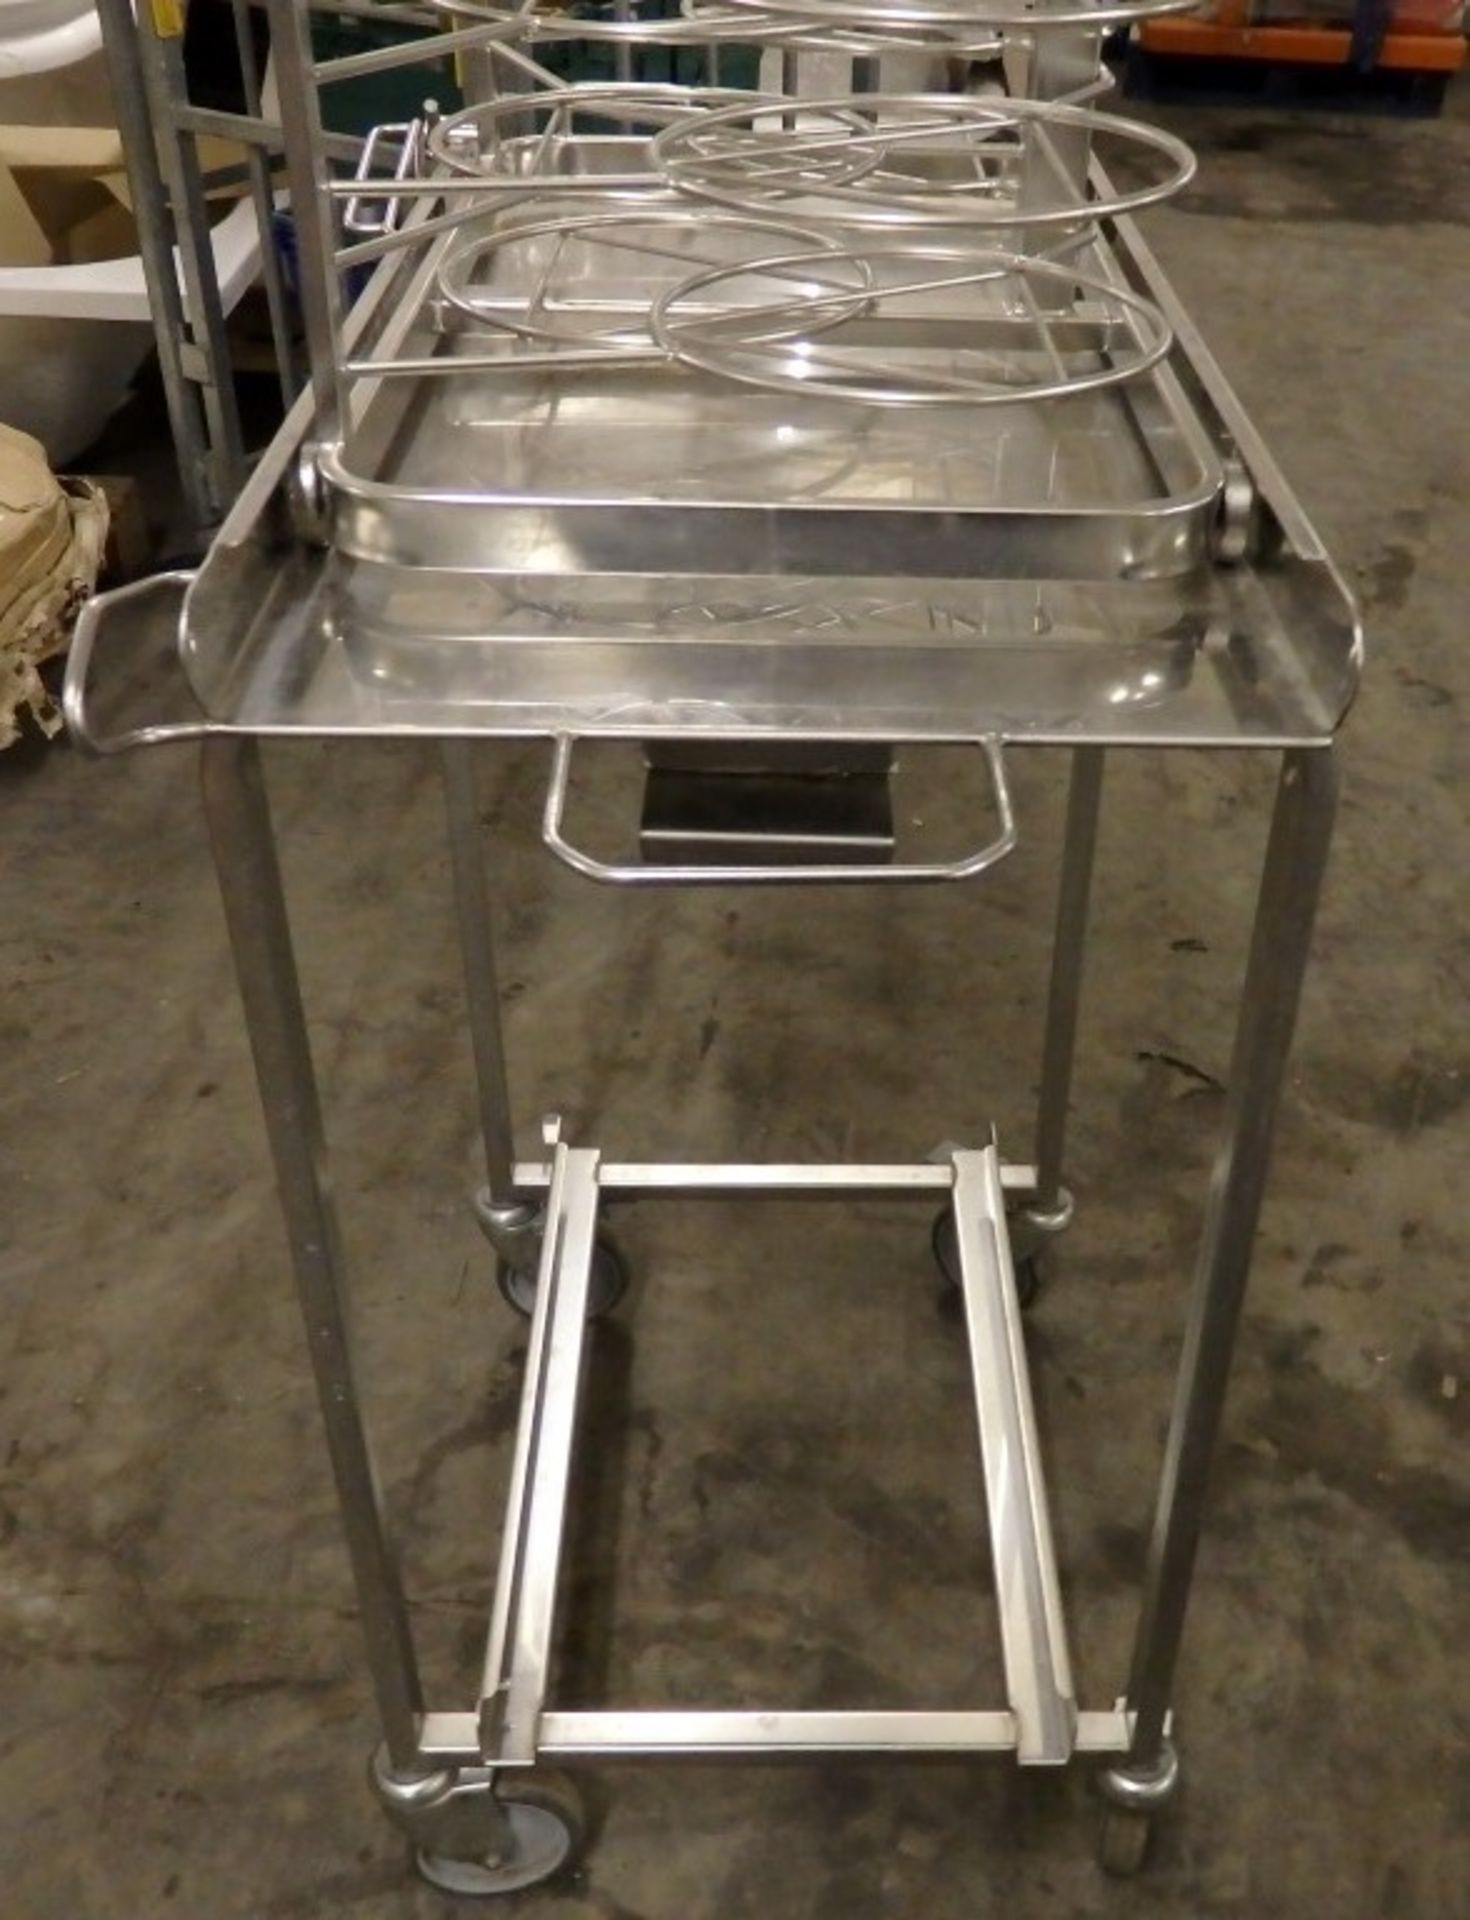 1 x Stainless Steel Plate Rack / Trolley With Thermal Cover - 31 Plate Capacity - Only Used Once - - Image 4 of 4